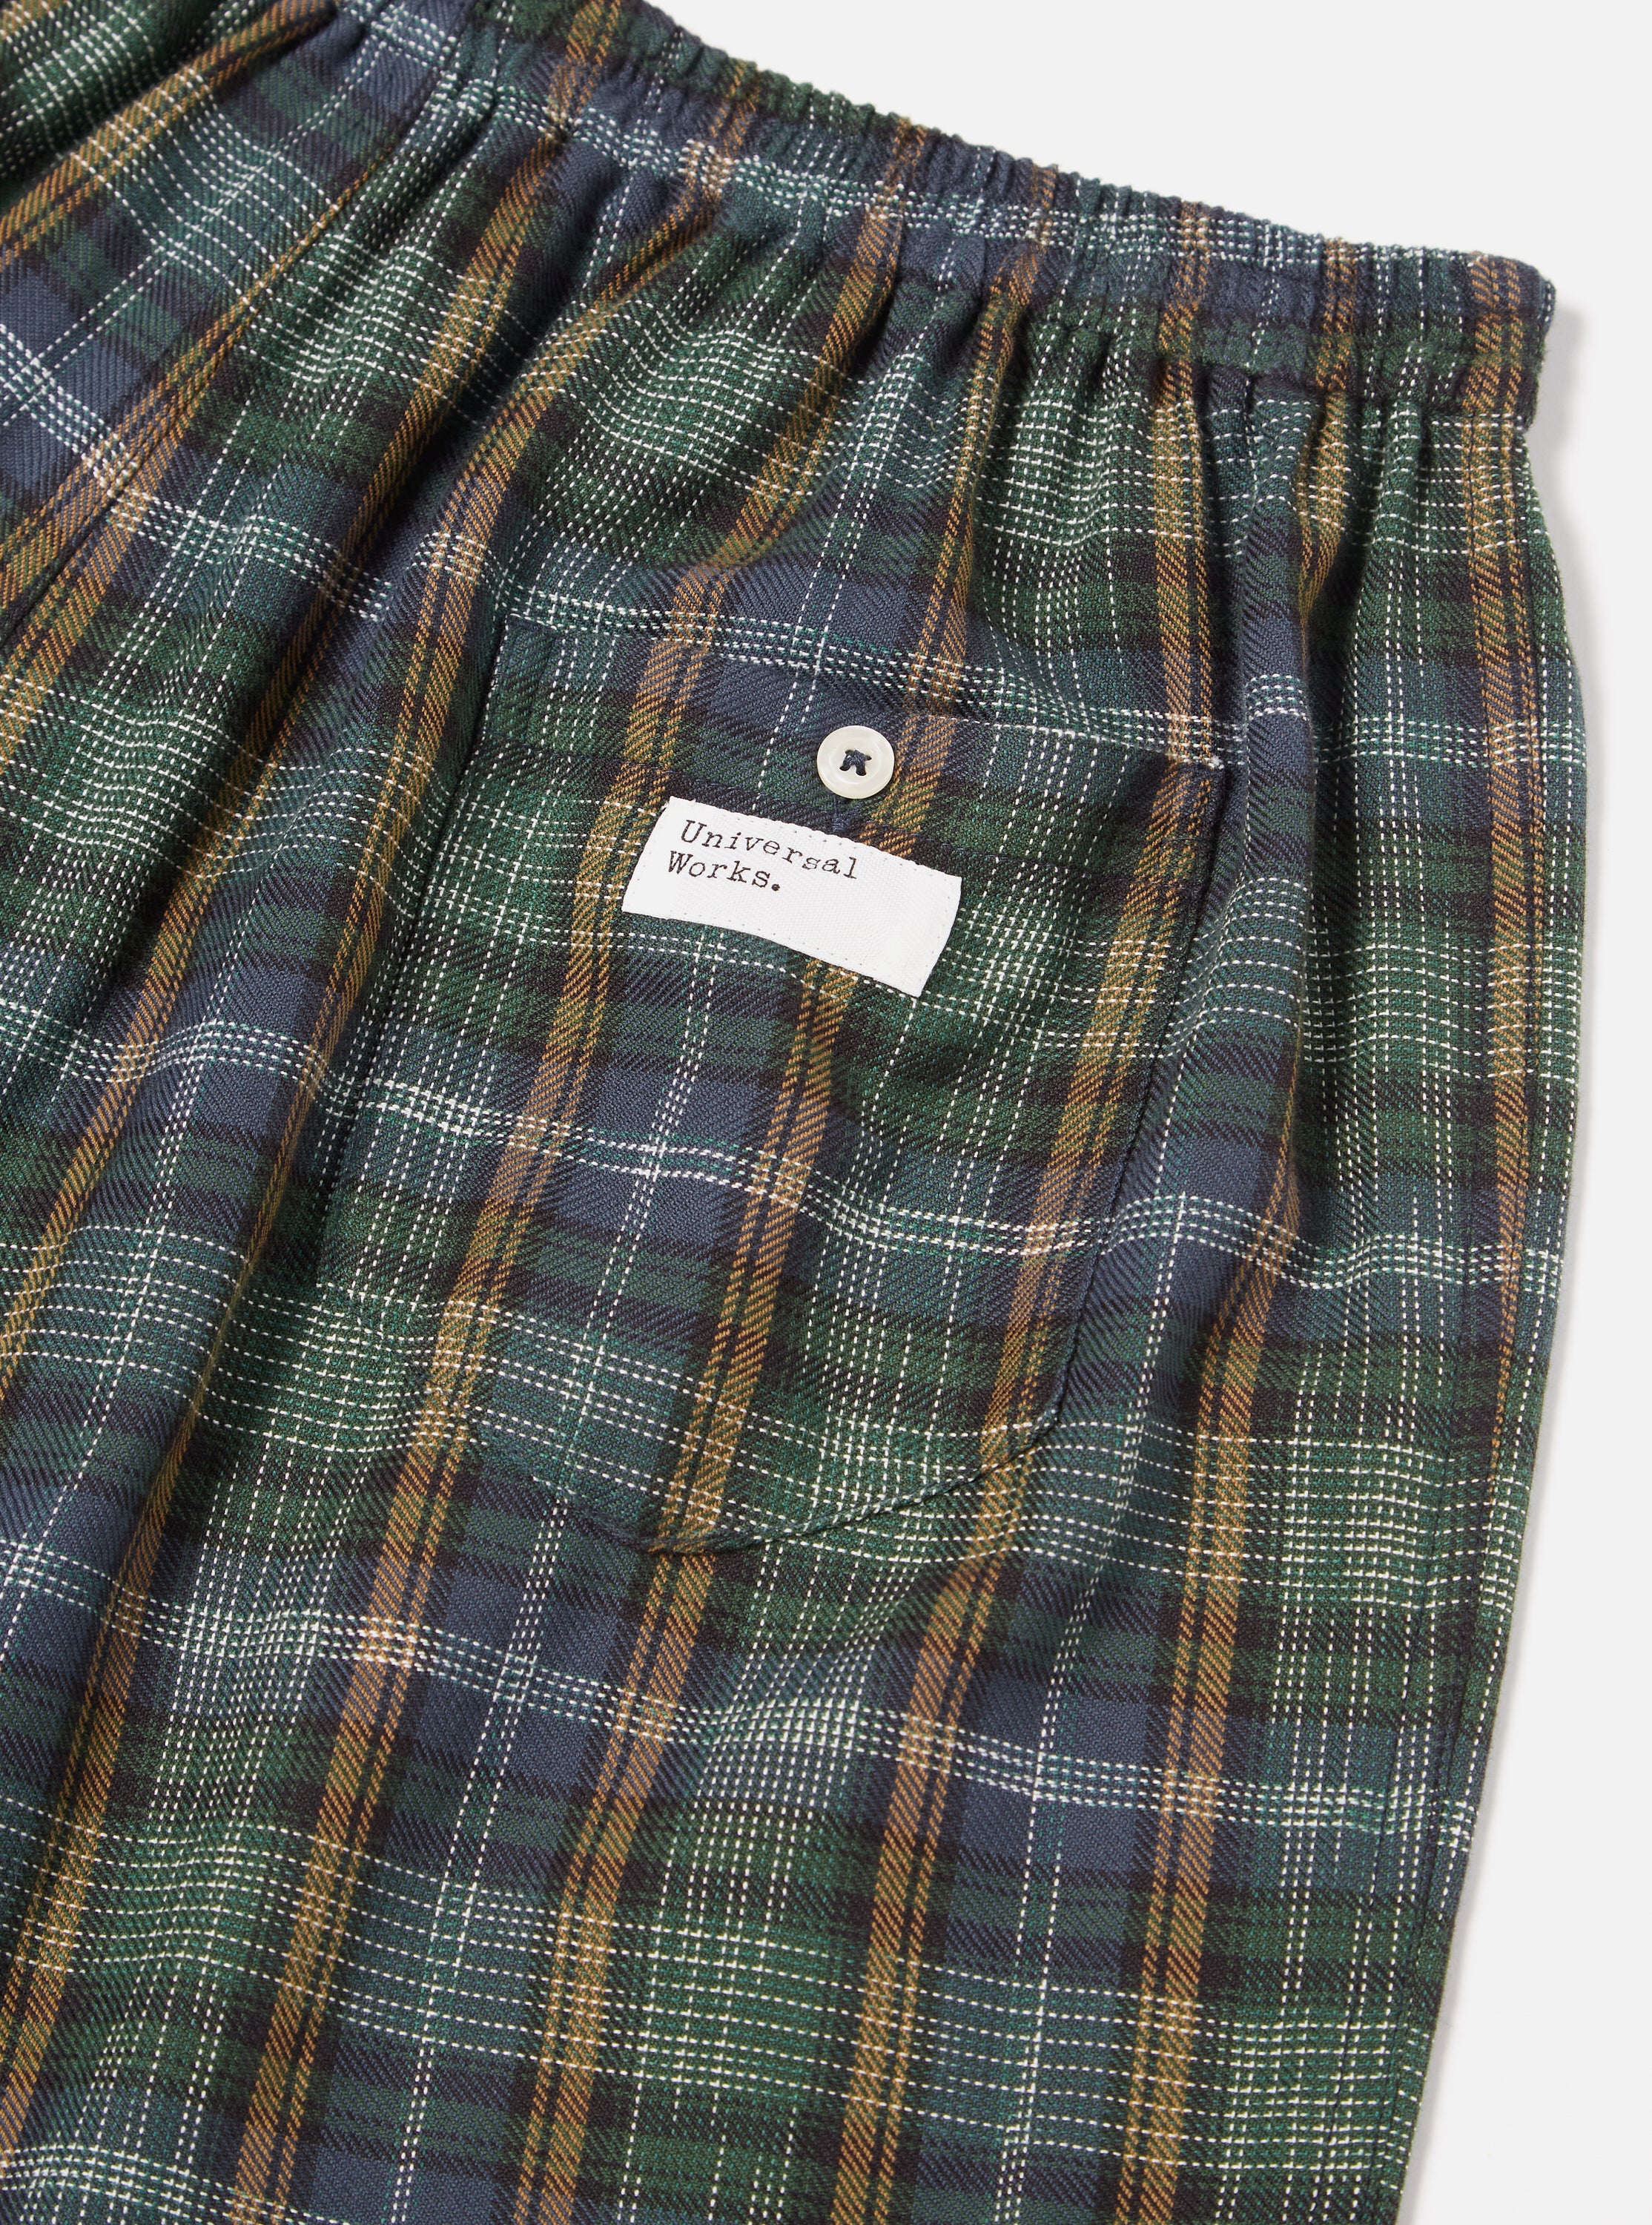 Universal Works Boxer Short in Green Ikat Twill Check